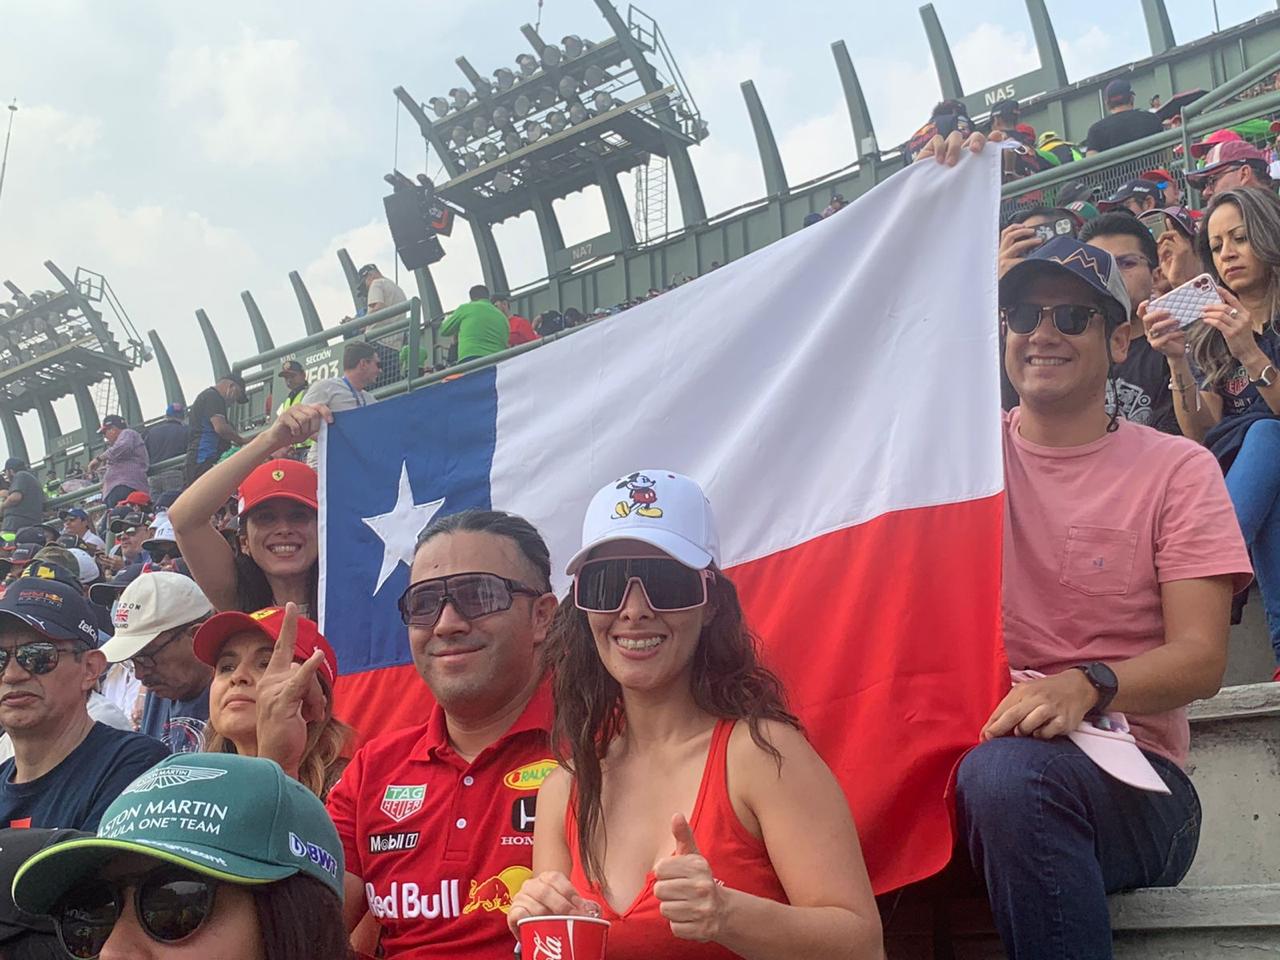 Red Bull's support for Checo Pérez, Leclerc's disaster and the great atmosphere on the first day of the Mexican GP 